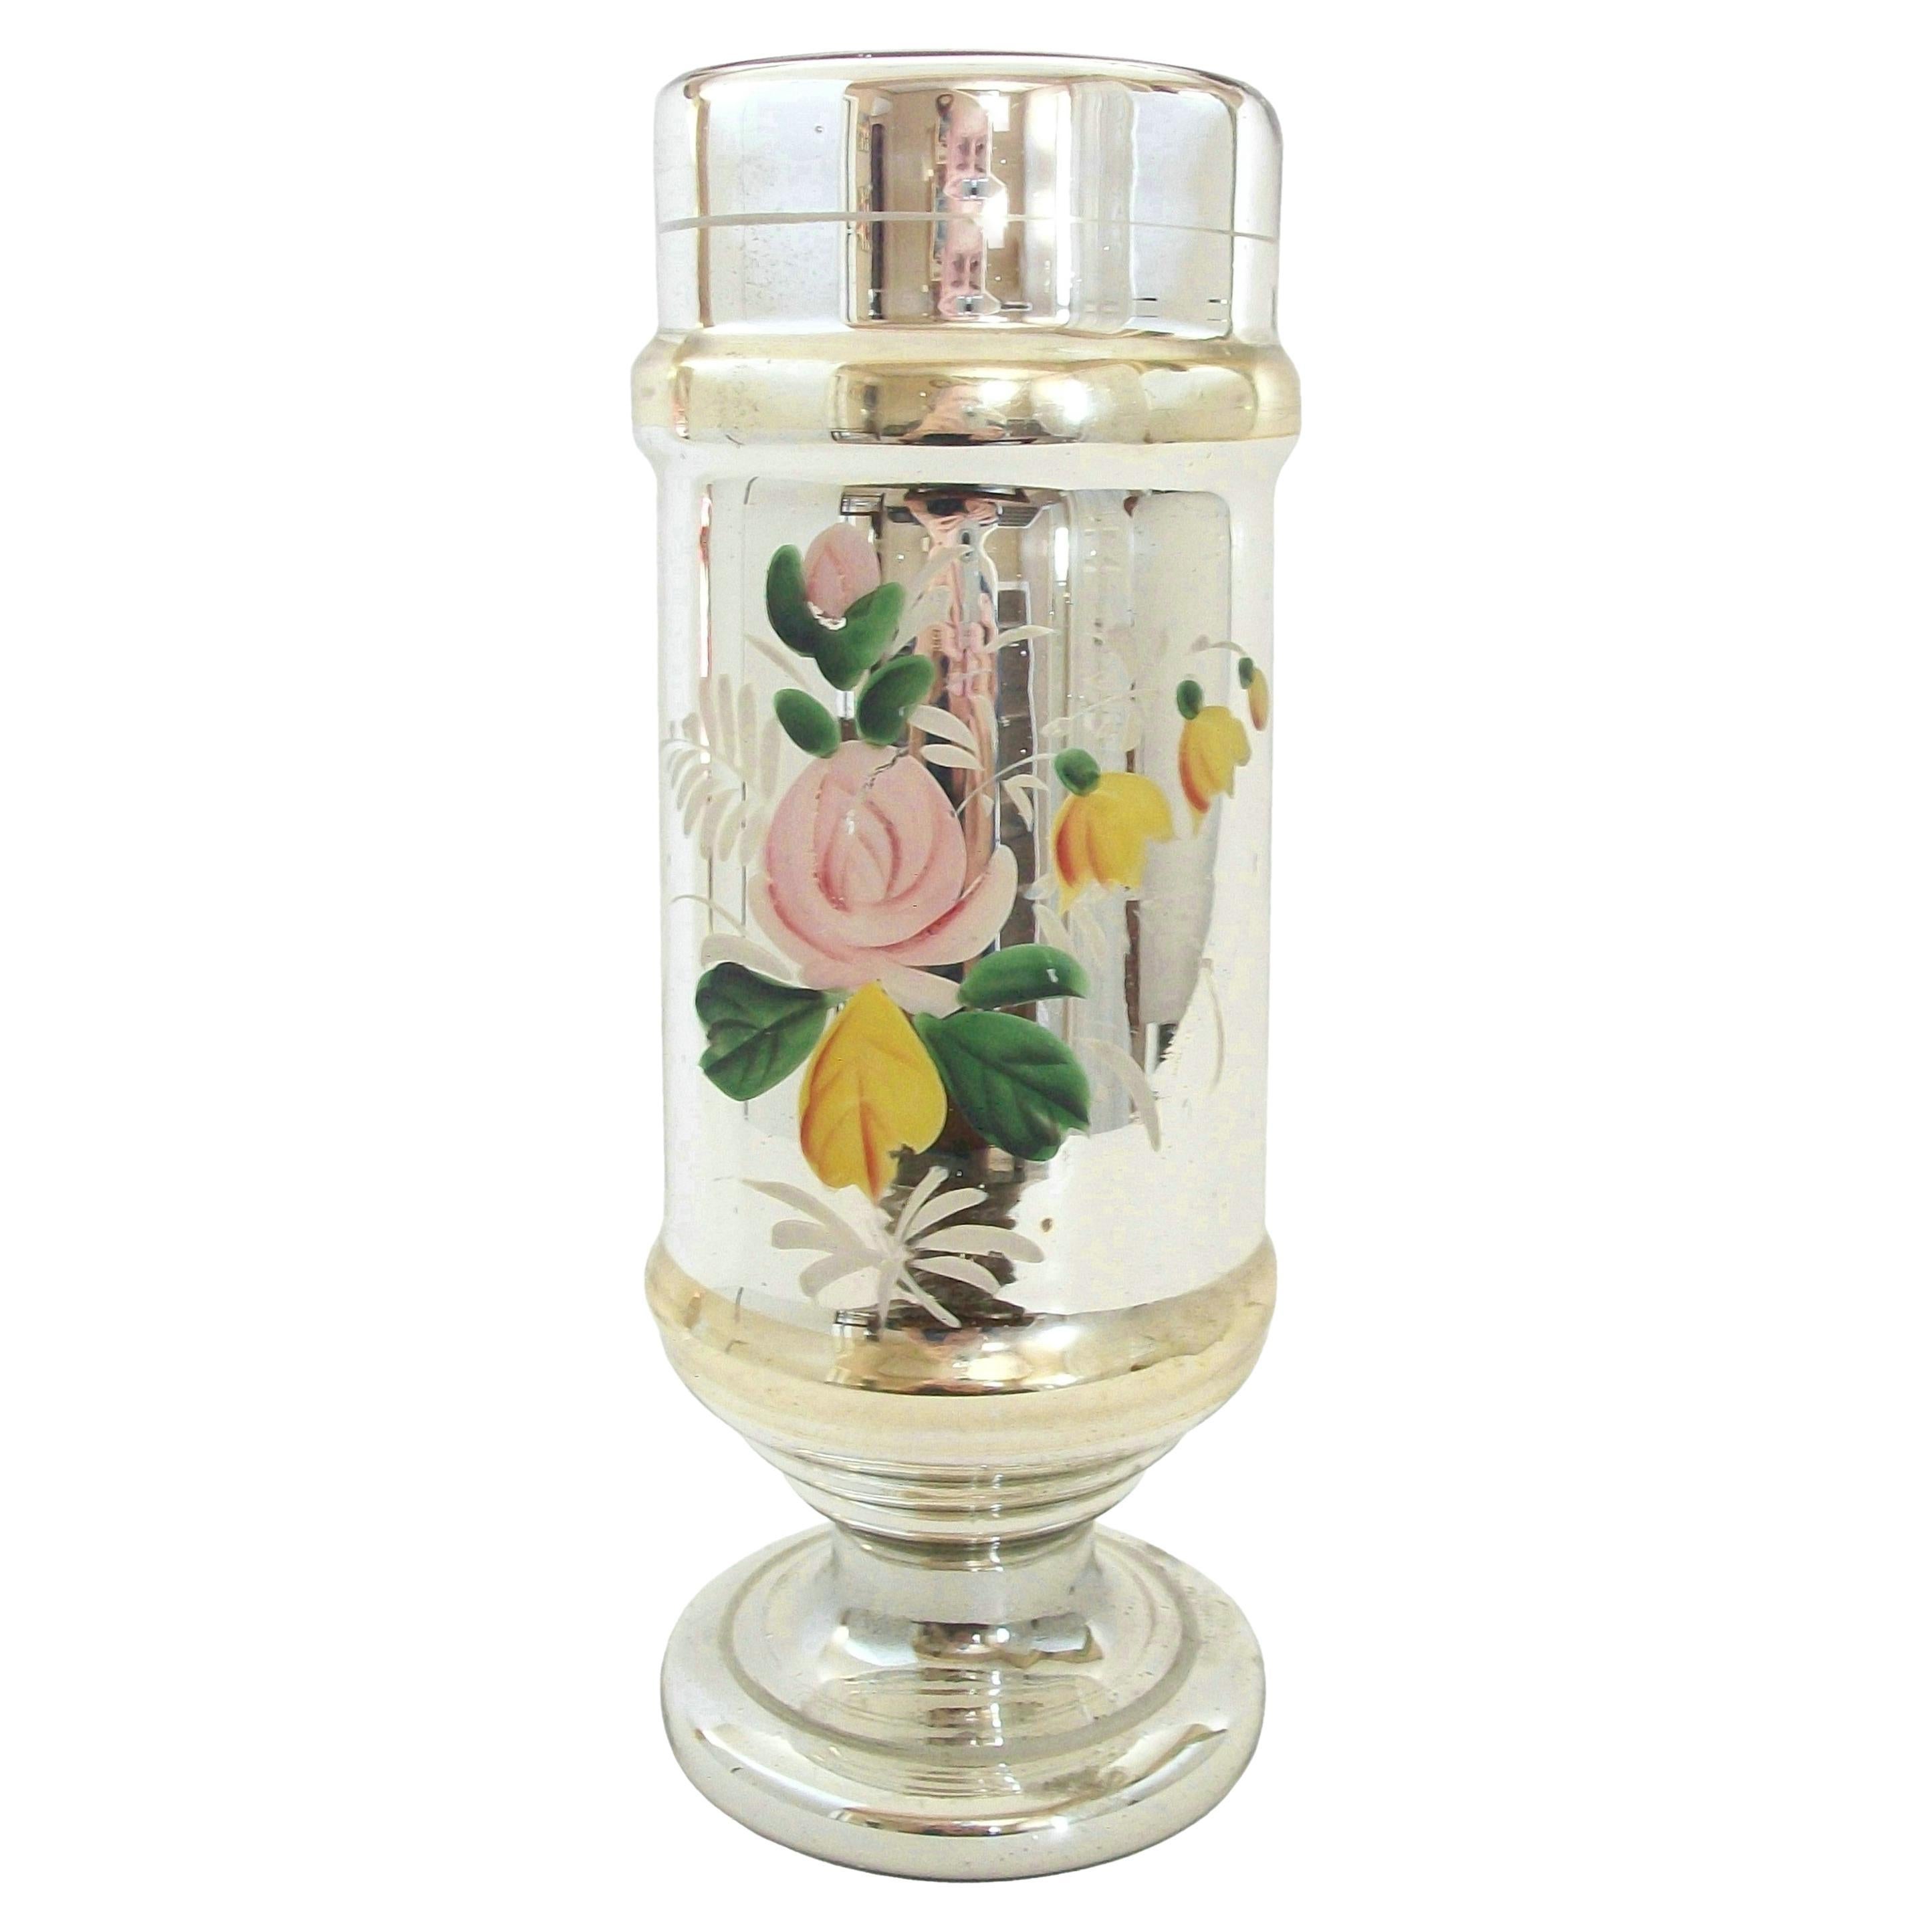 Antique Floral Painted Gold & Silver Mercury Glass Vase - France - 19th Century For Sale